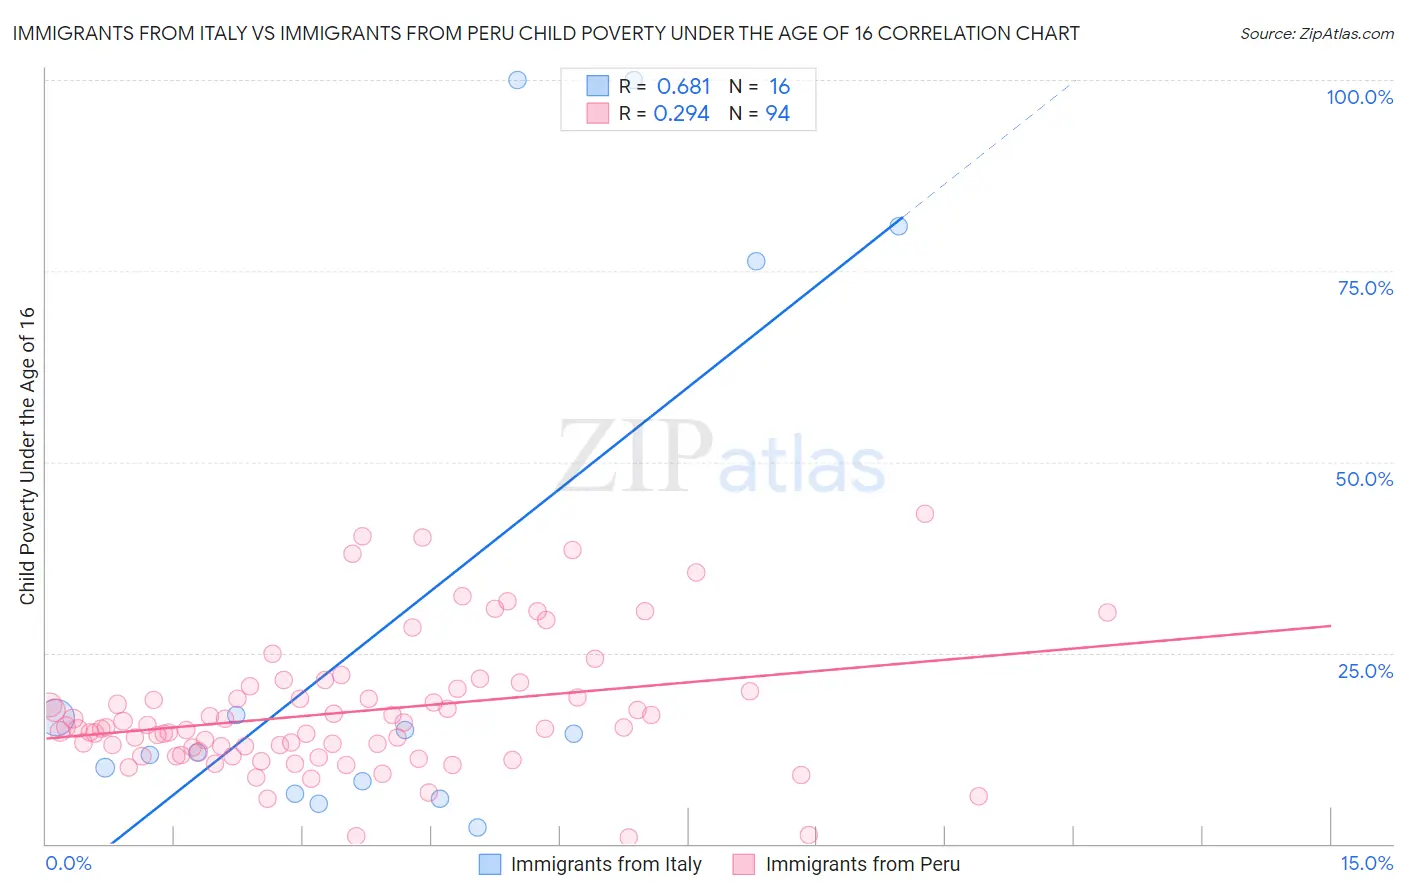 Immigrants from Italy vs Immigrants from Peru Child Poverty Under the Age of 16